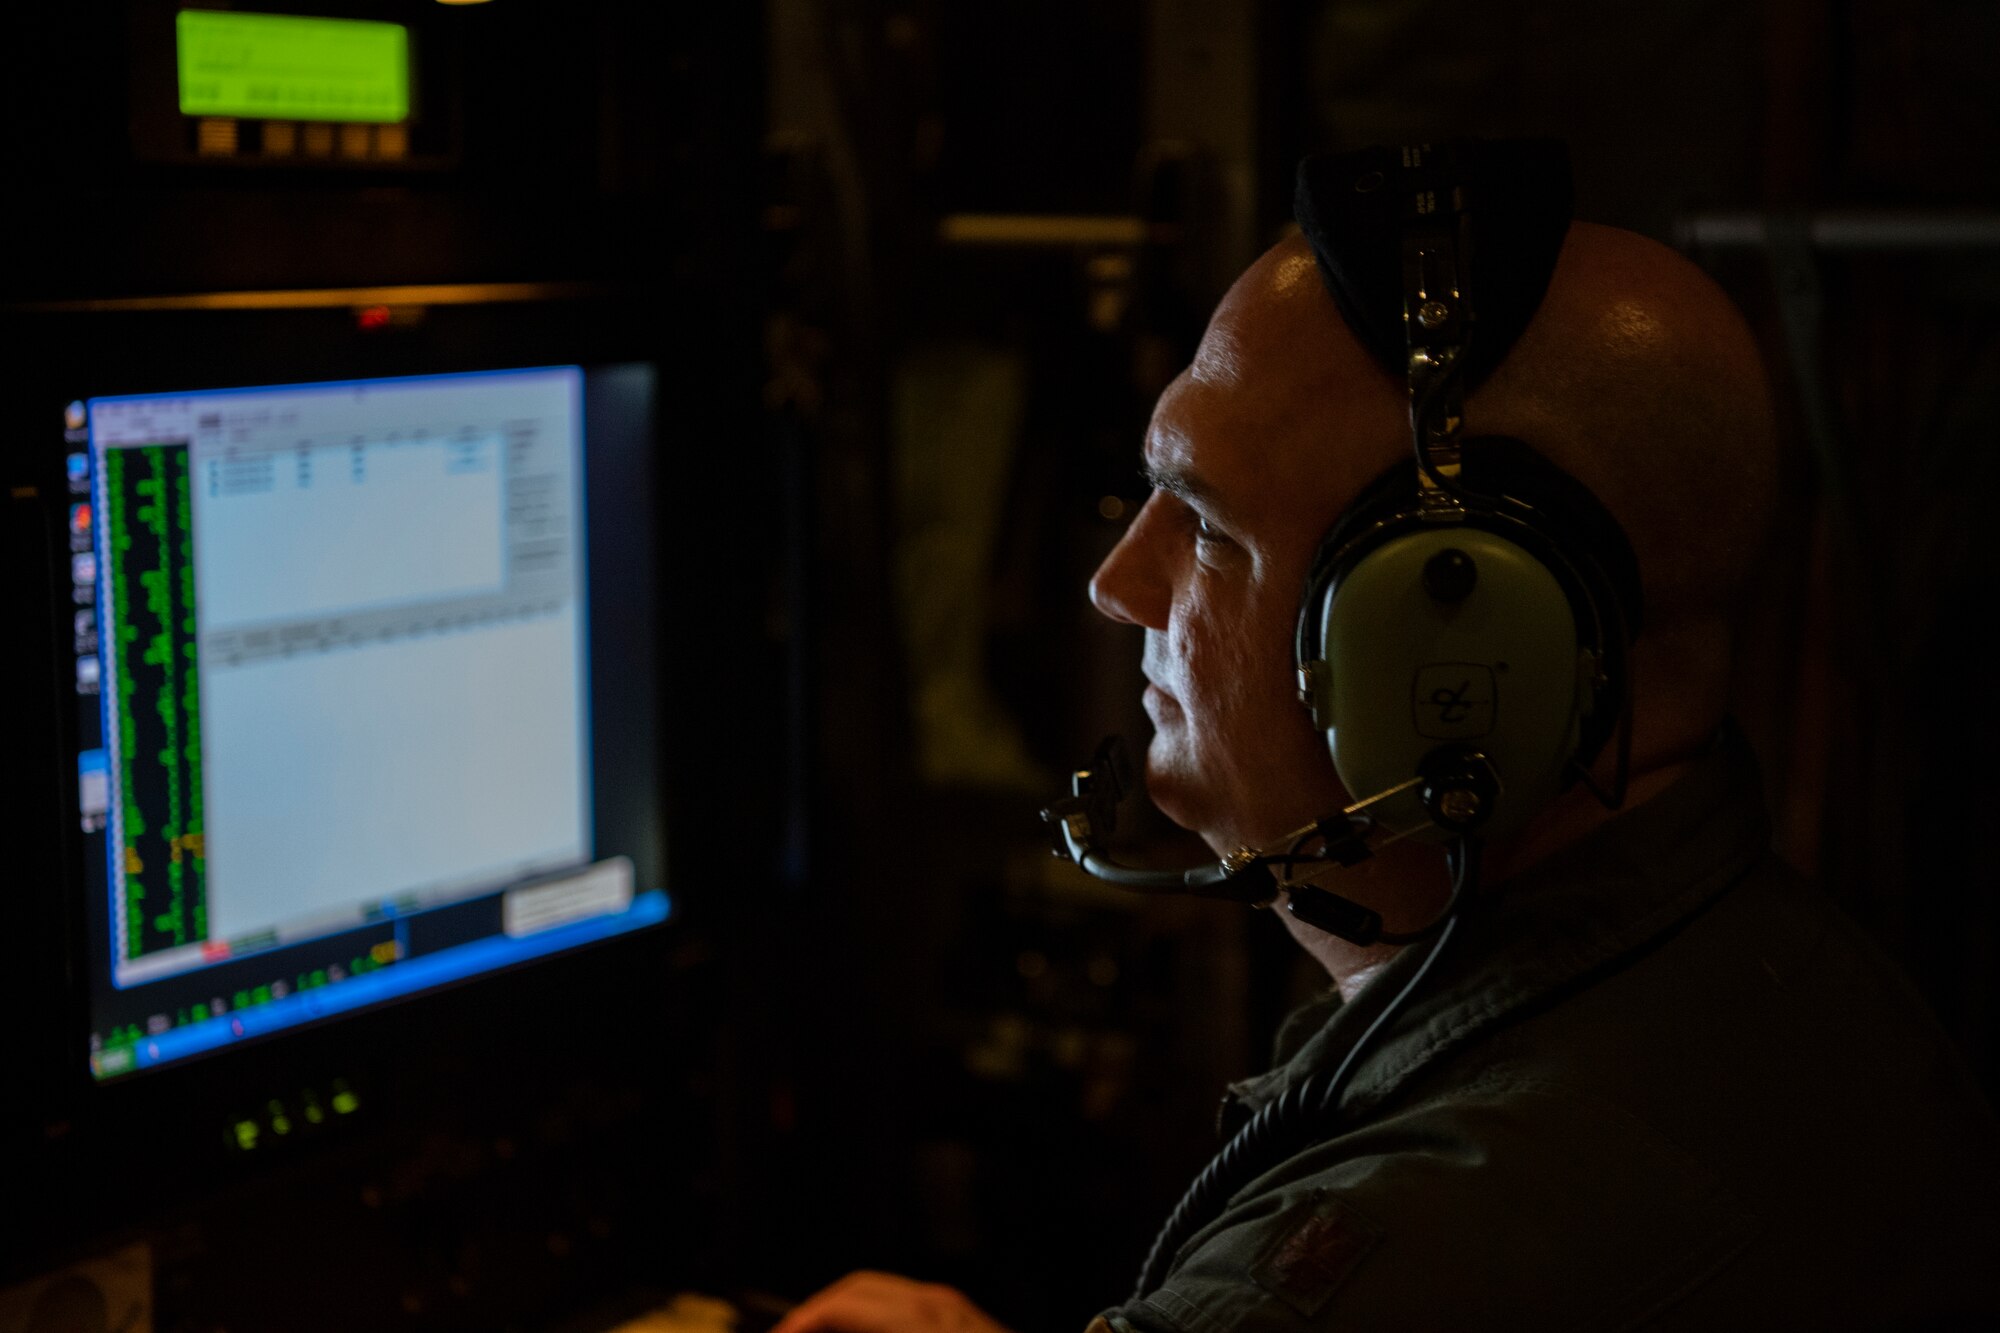 U.S Air Force Reserve Maj. Tobi Baker, 53rd Weather Reconnaissance Squadron aerial reconnaissance weather officer conducts weather research during a Hurricane Hunter mission after taking off from the Savanah Combat Readiness Training Center, Ga., Sept. 12, 2018. The U.S. Air Force Reserve's 53rd WRS is conducting a storm tasking mission into Hurricane Florence. The tasking provides critical and timely weather data for the National Hurricane Center to assist in providing up-to-date and accurate information for storm forecasts. (U.S. Air Force Photo by Tech. Sgt. Chris Hibben)